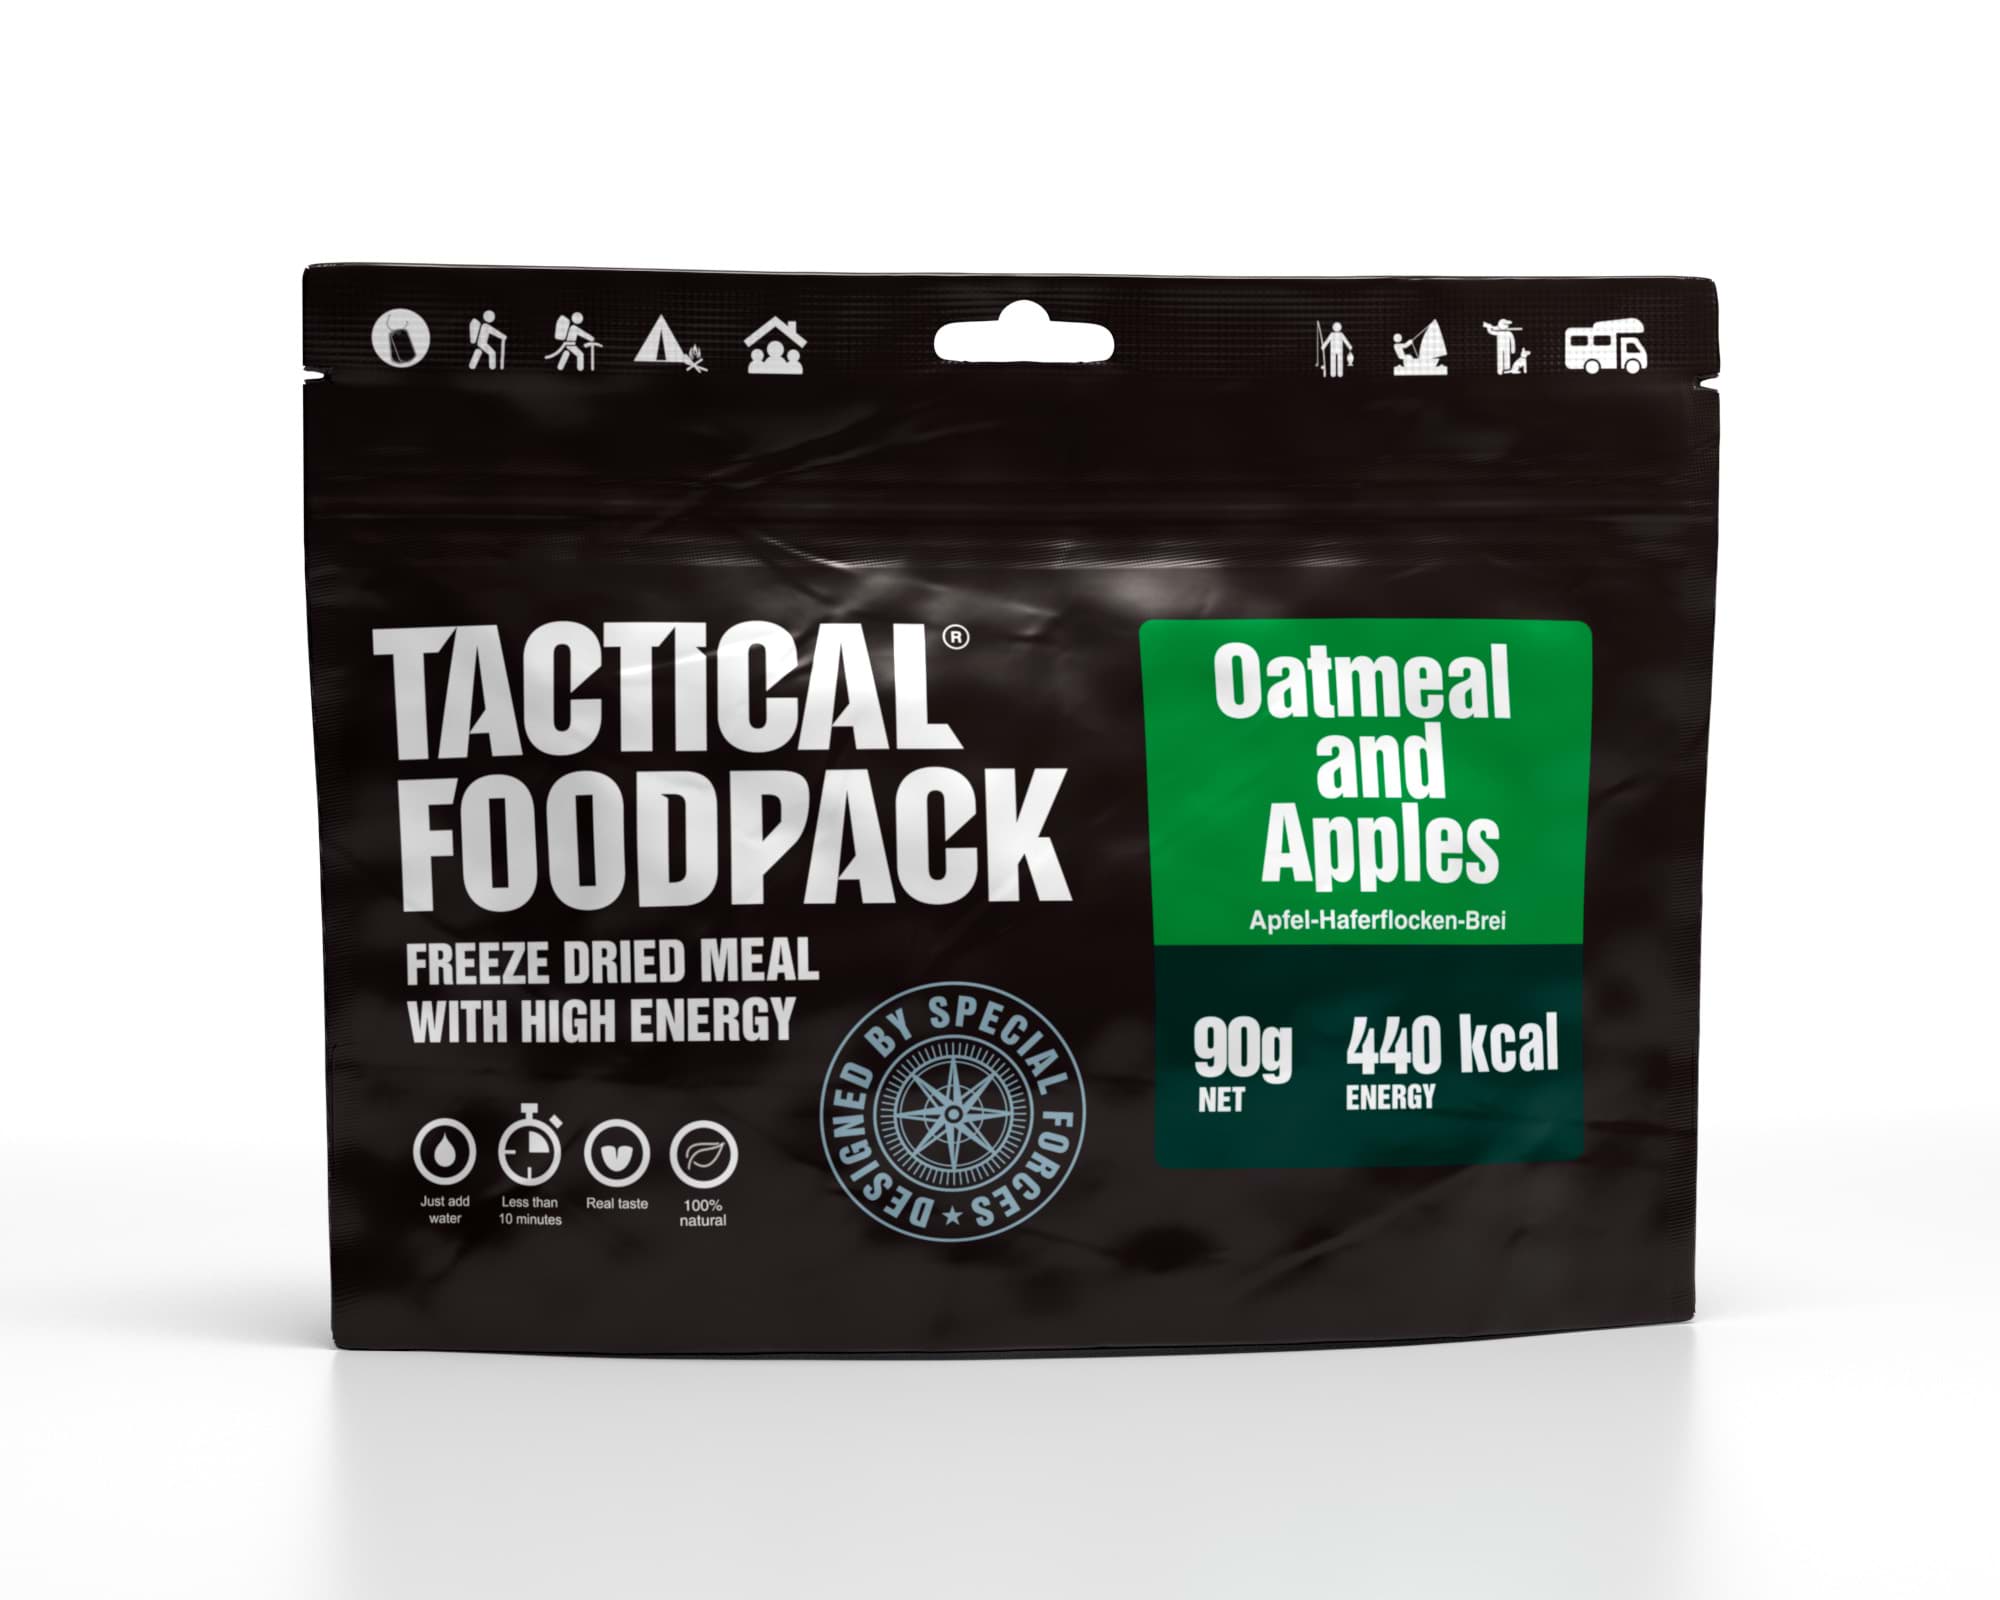 Bild von Tactical Foodpack - Oatmeal and Apples 90 g